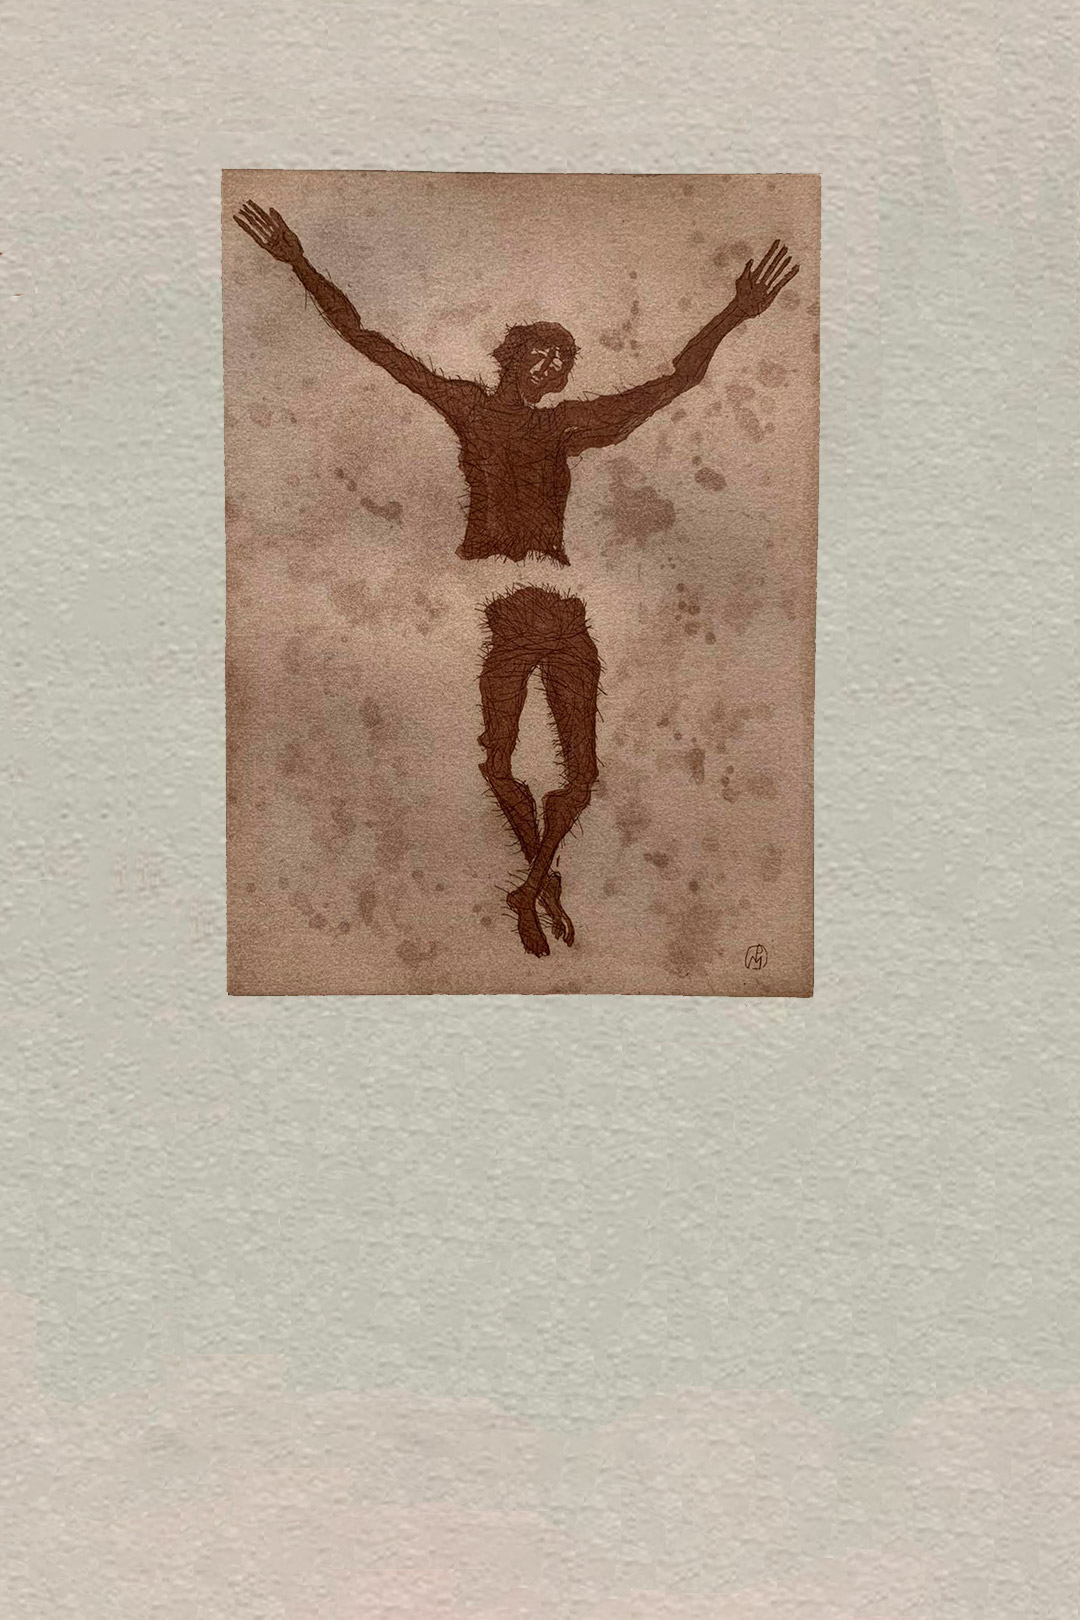 &quotIl Cristo Spezzato" by Mimmo Paladino: the work donated to support the &quotil senso del Pane" project